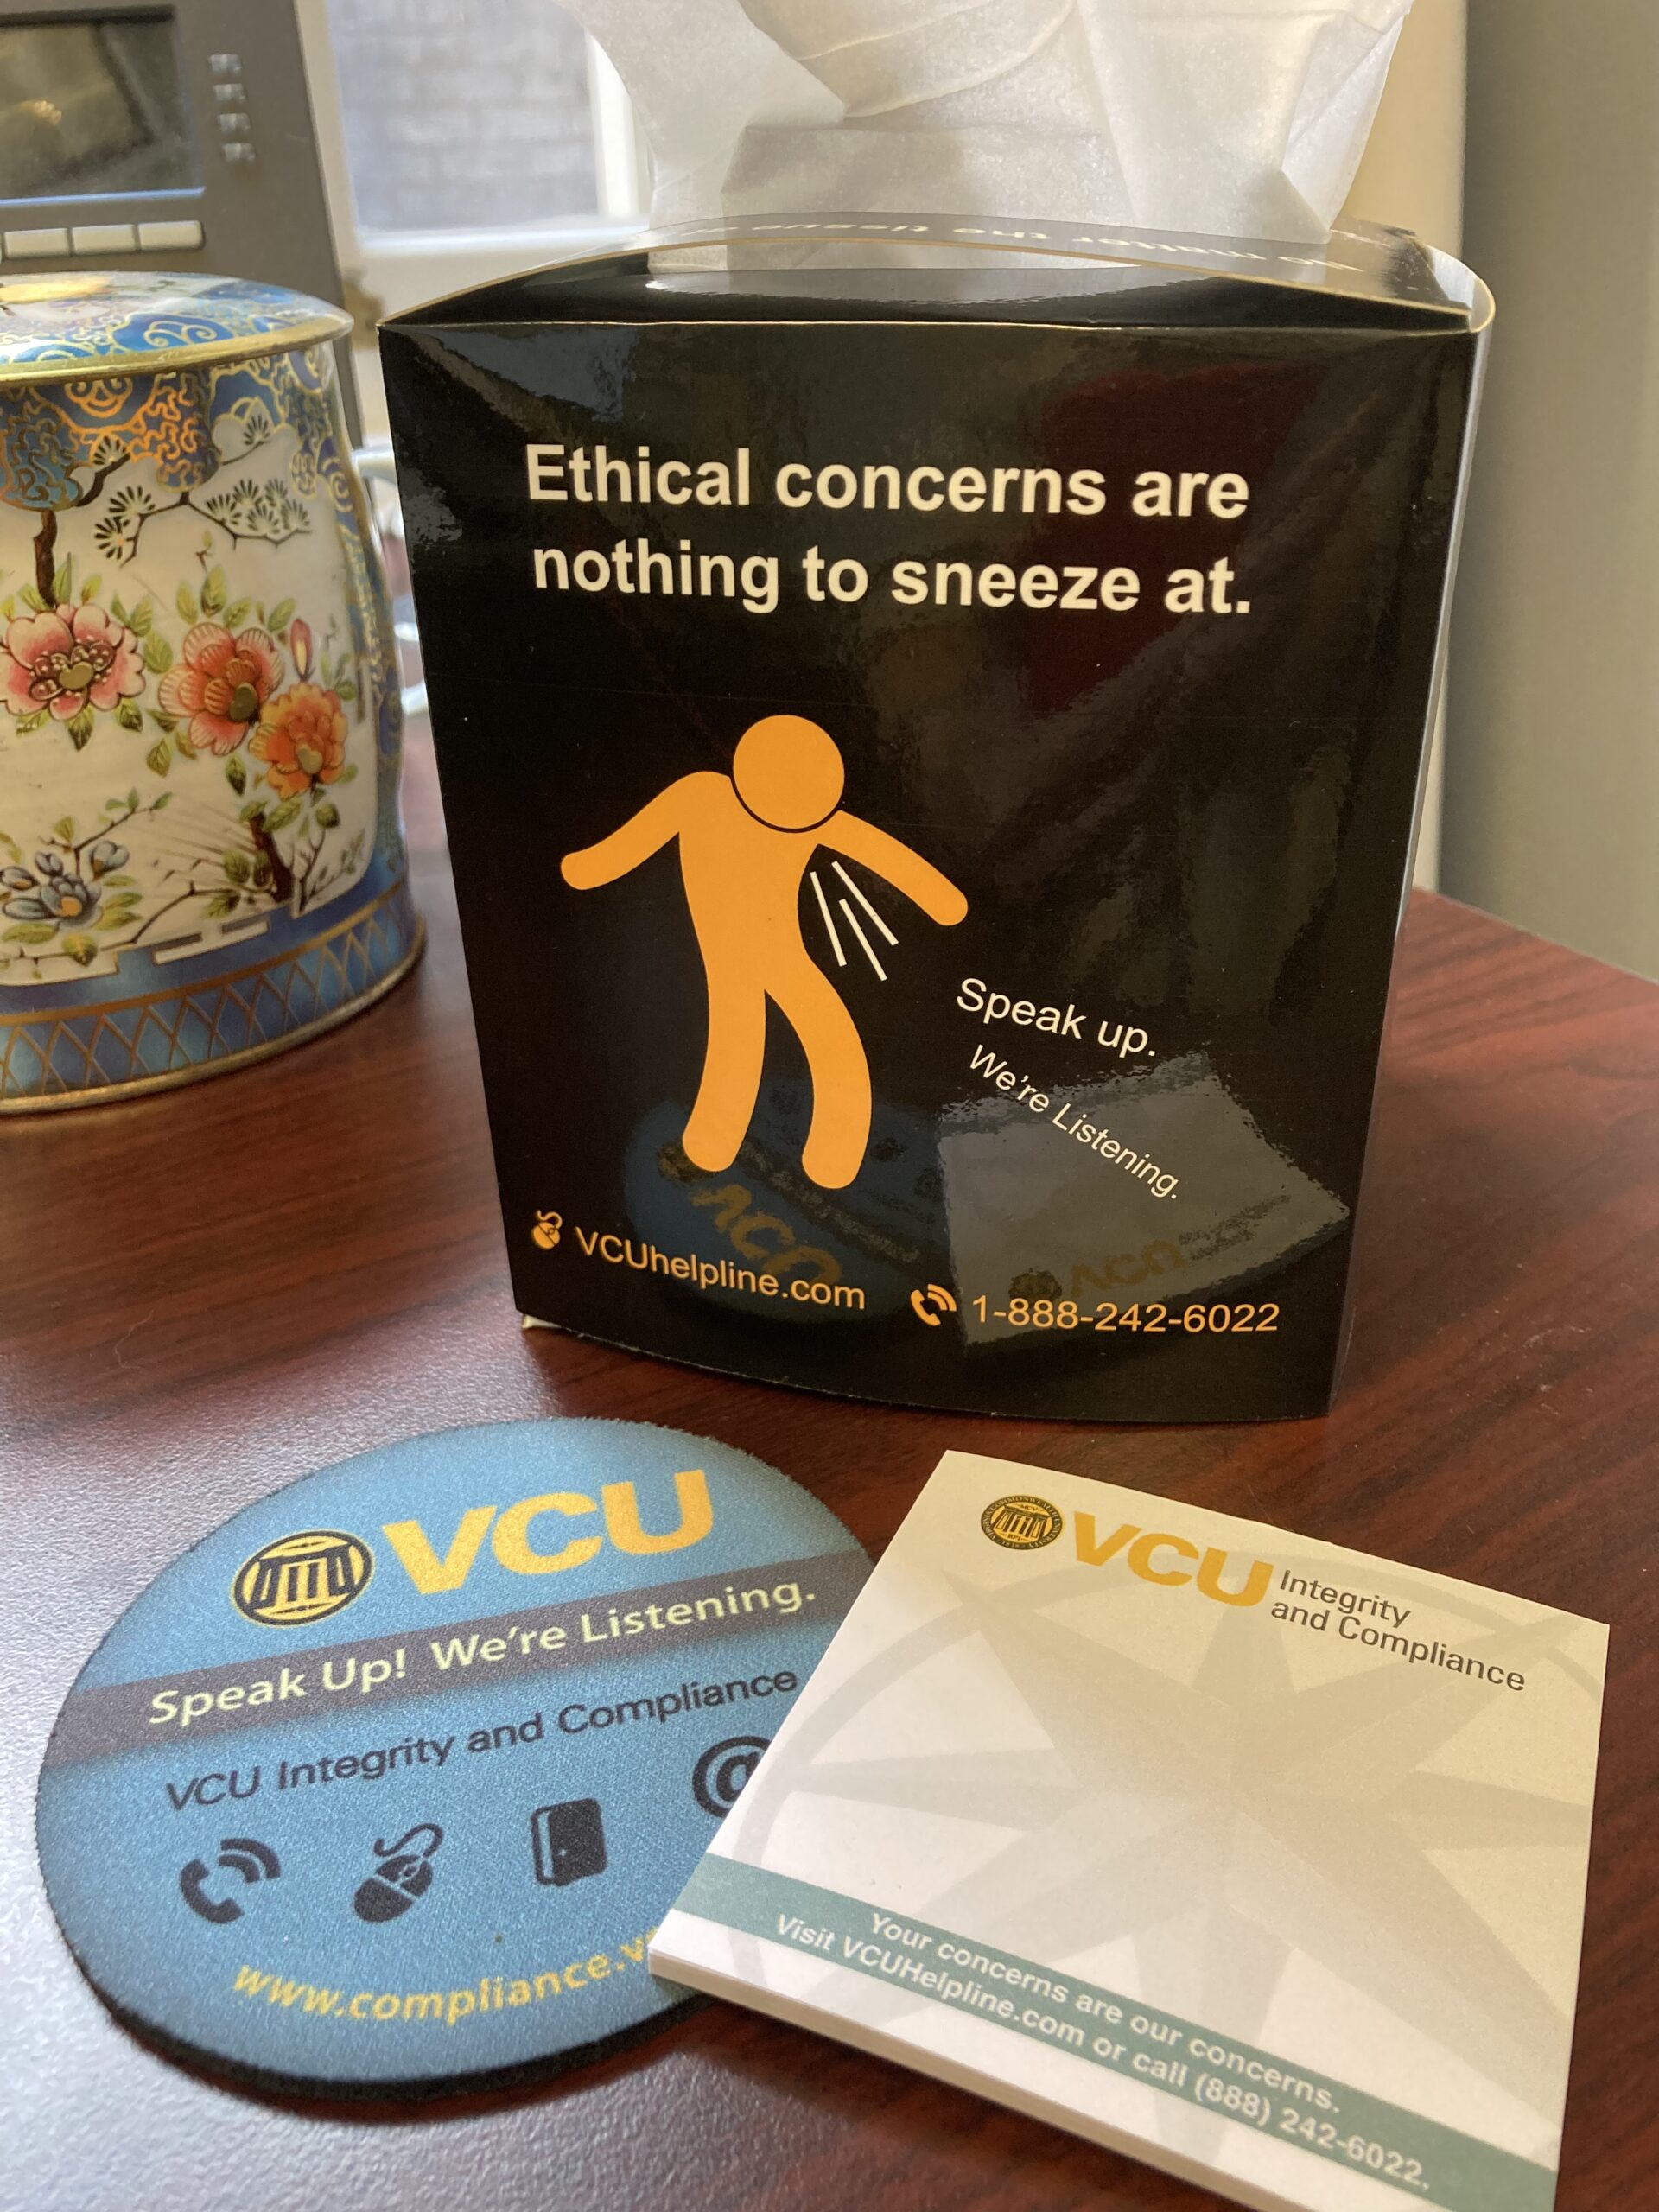 A desktop scattered with several tchotchkes from the Integrity and Compliance Office. A sticky-note pad says, "You're concerns are our concerns," a coaster says, "Speak up! We're listening," and a tissue box cover shows a picture of a stick figure that's sneezing, and says, "Ethical concerns are nothing to sneeze at."